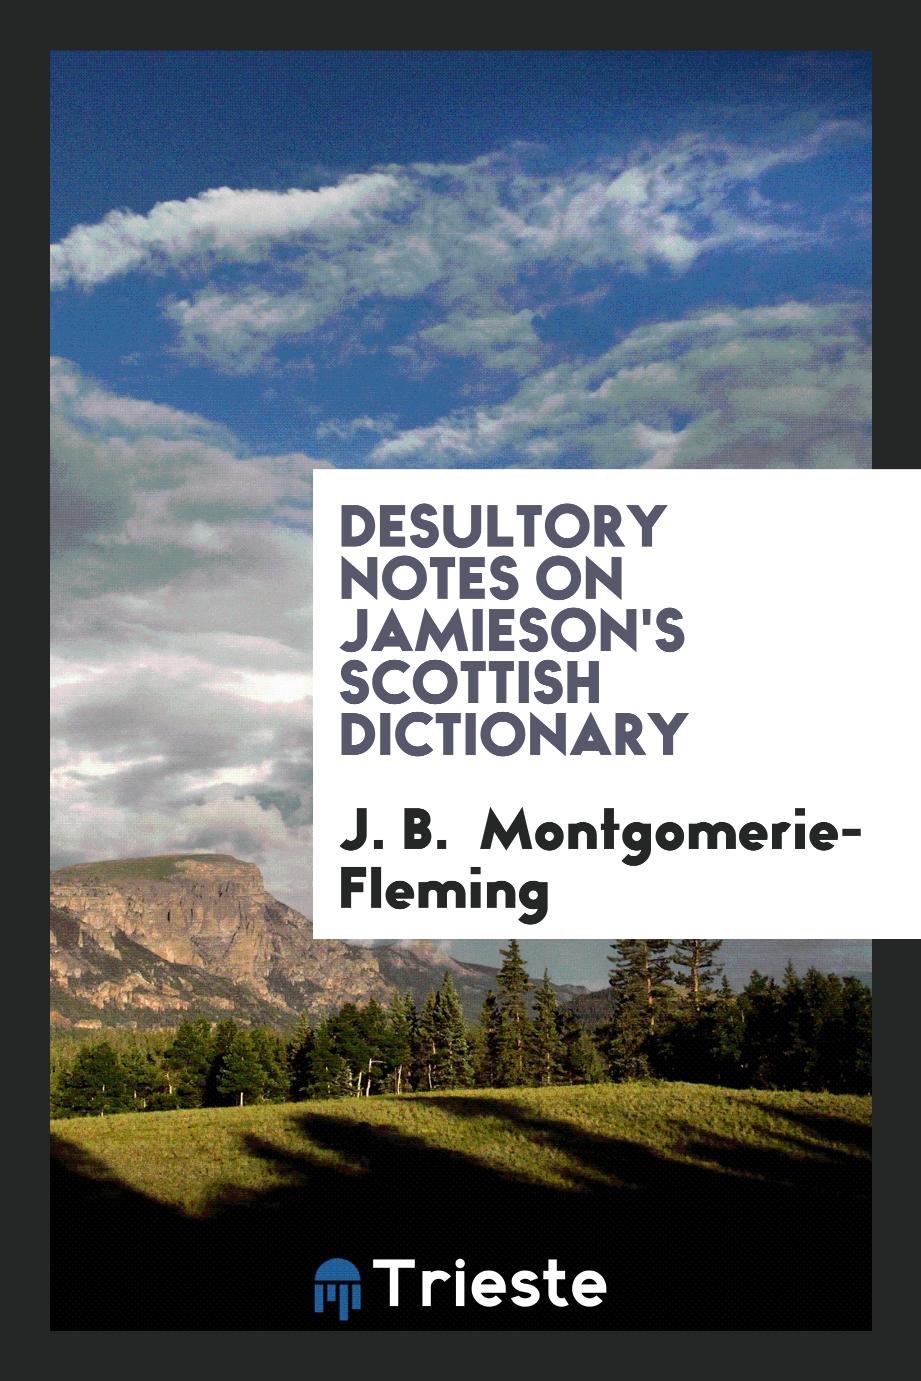 Desultory notes on Jamieson's Scottish dictionary